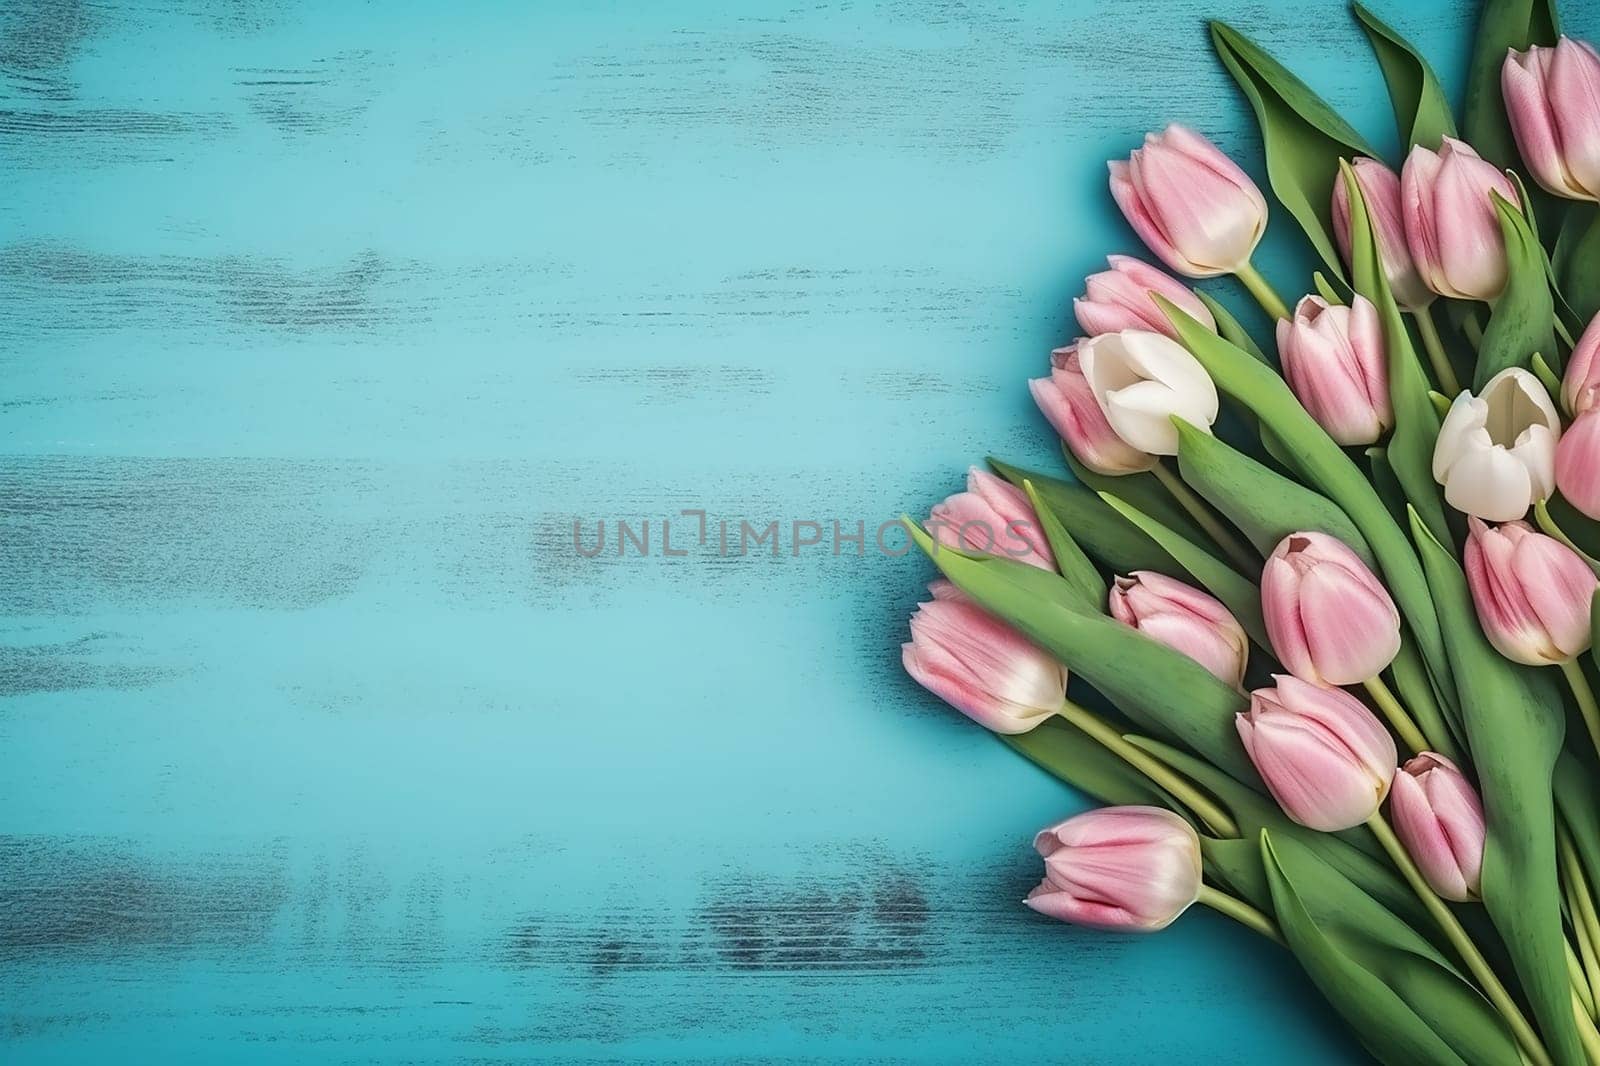 Pink and white tulips arranged on a blue wooden background.